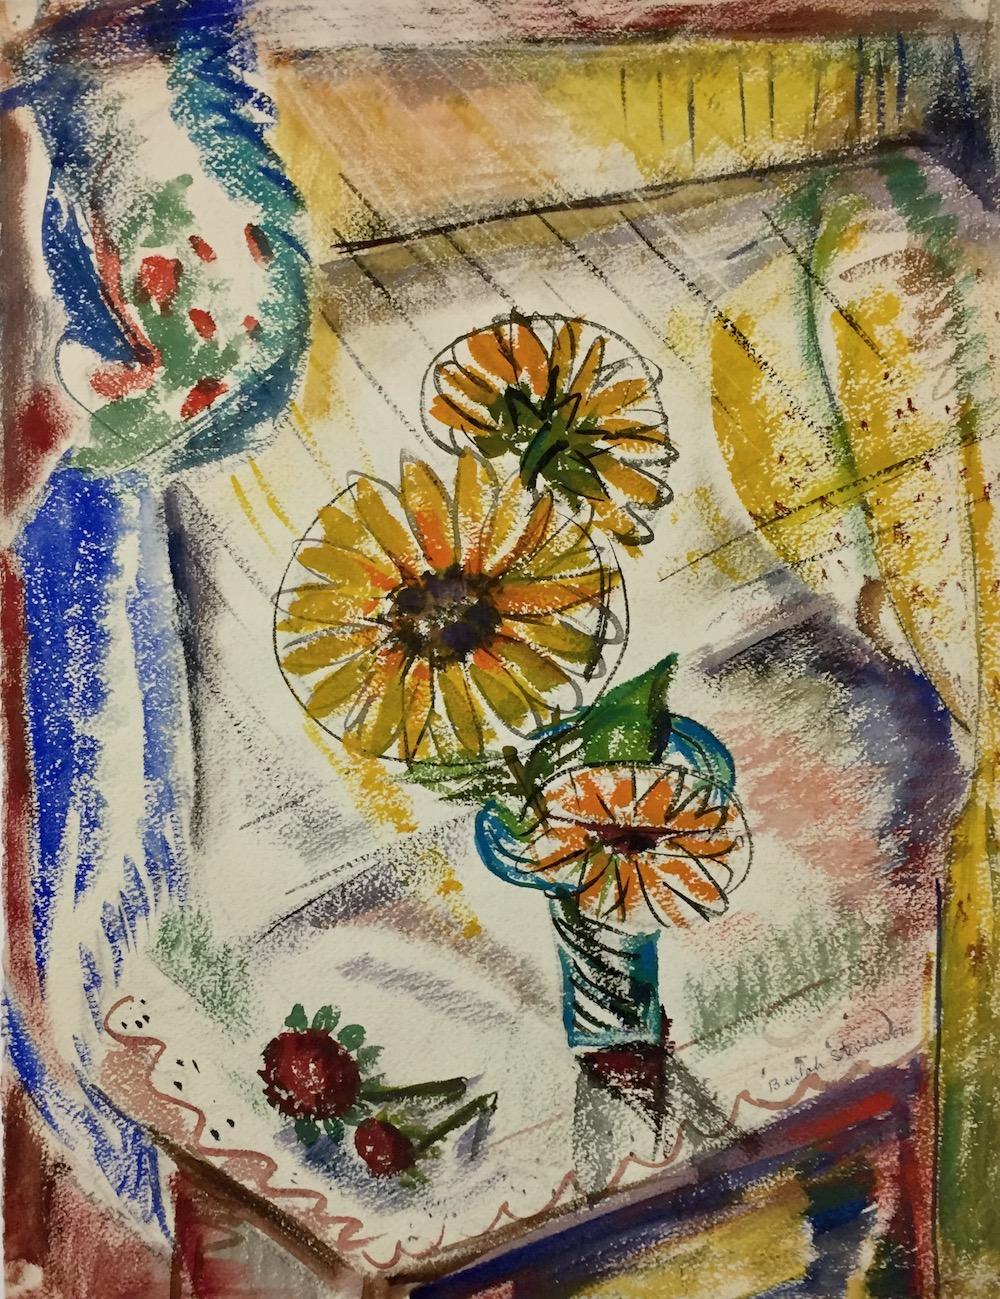 Beulah Stevenson, Three Small Sunflowers and Two Roses by the Window